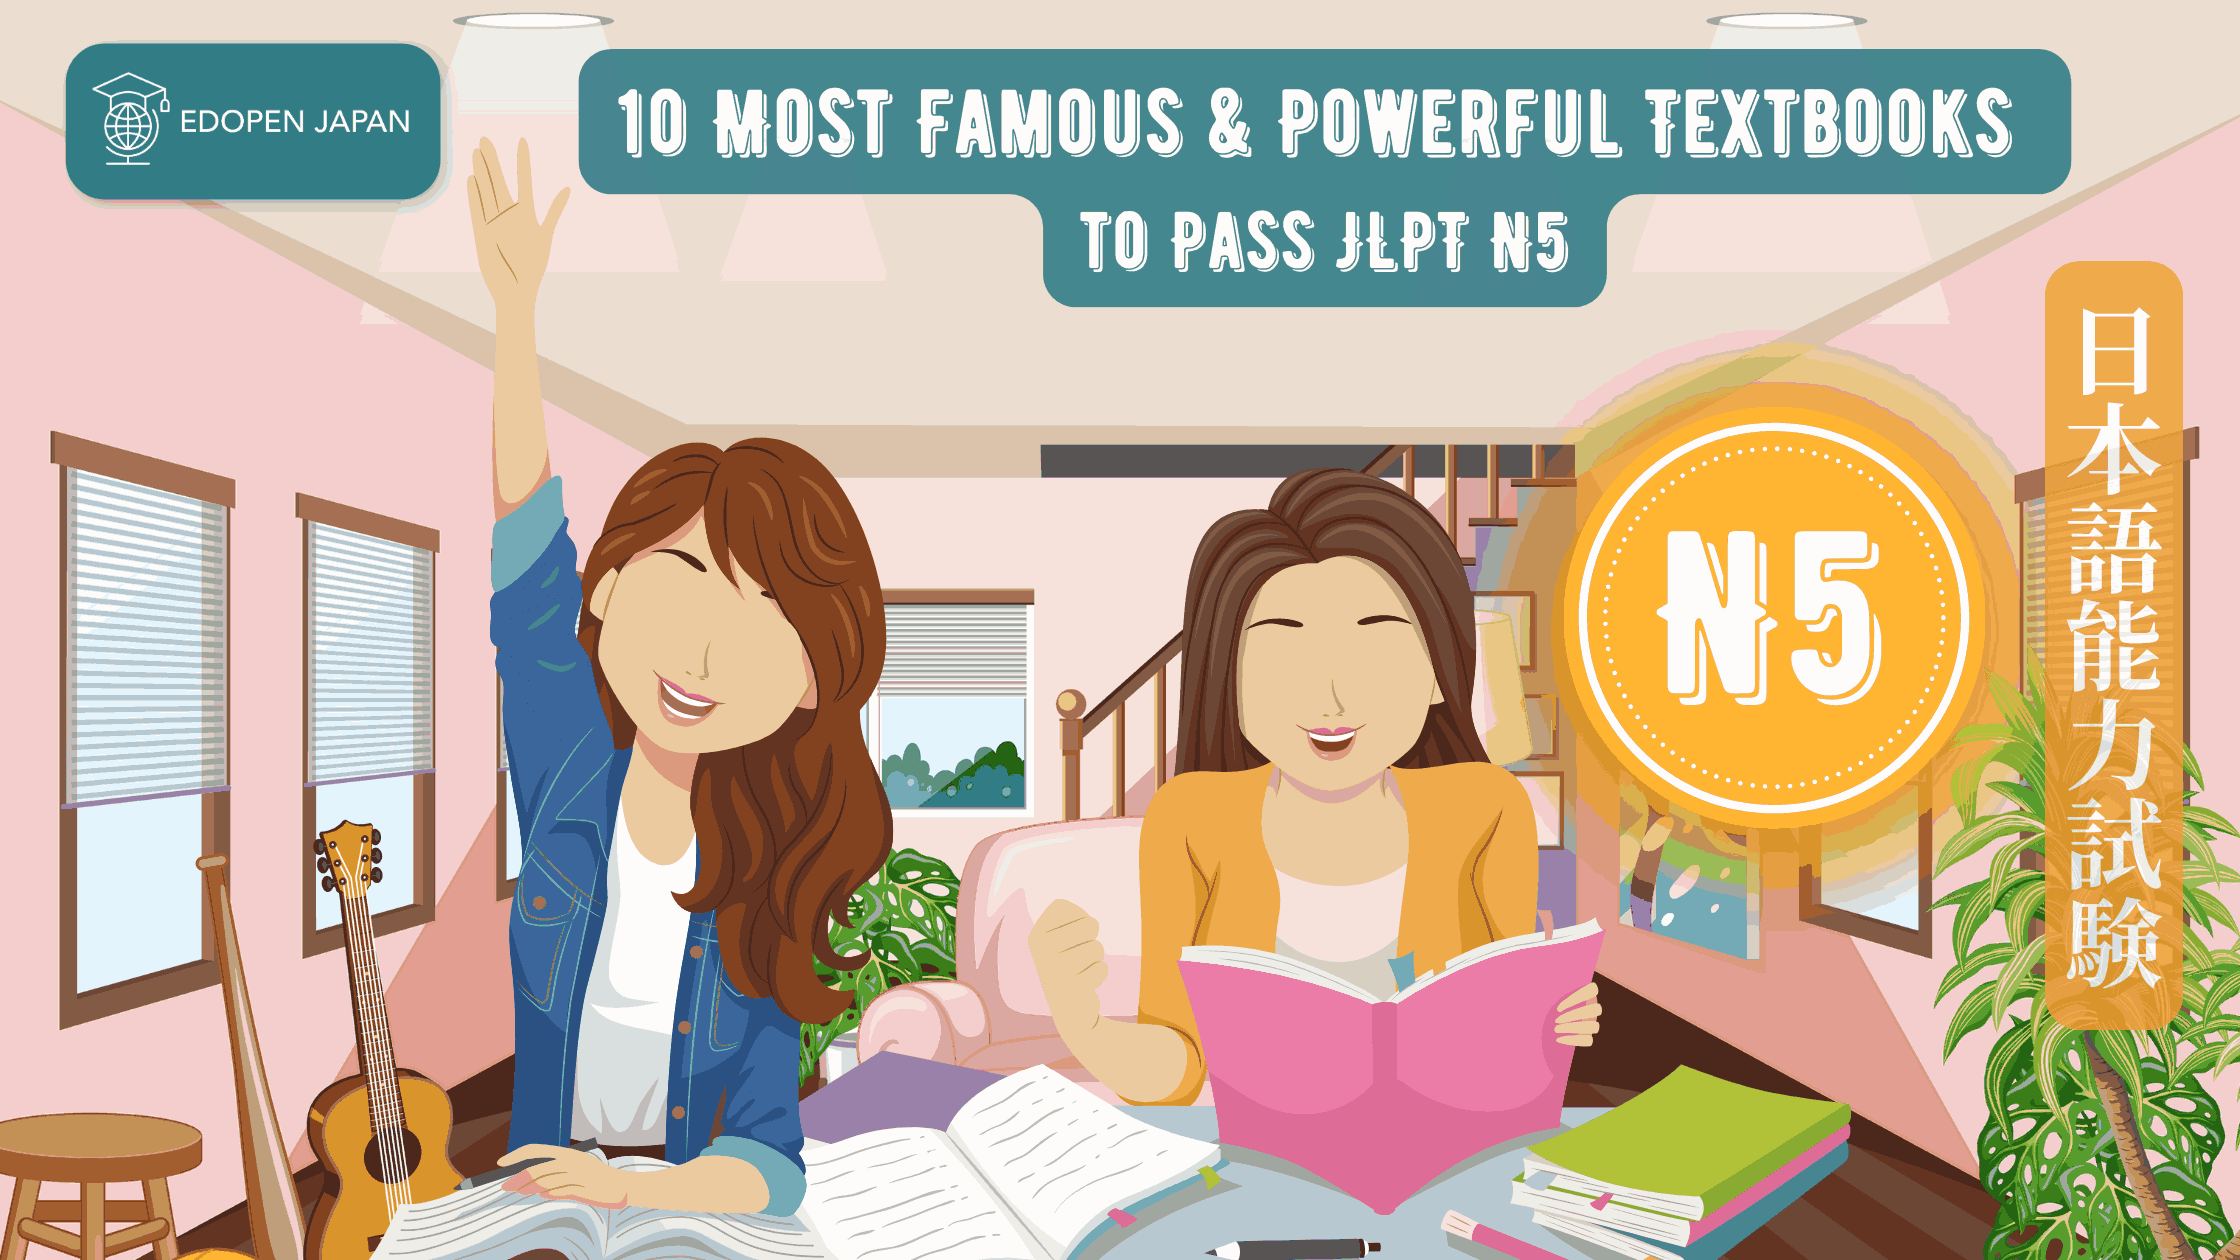 10 Most Famous & Powerful Textbooks to Pass JLPT N5 - EDOPEN Japan